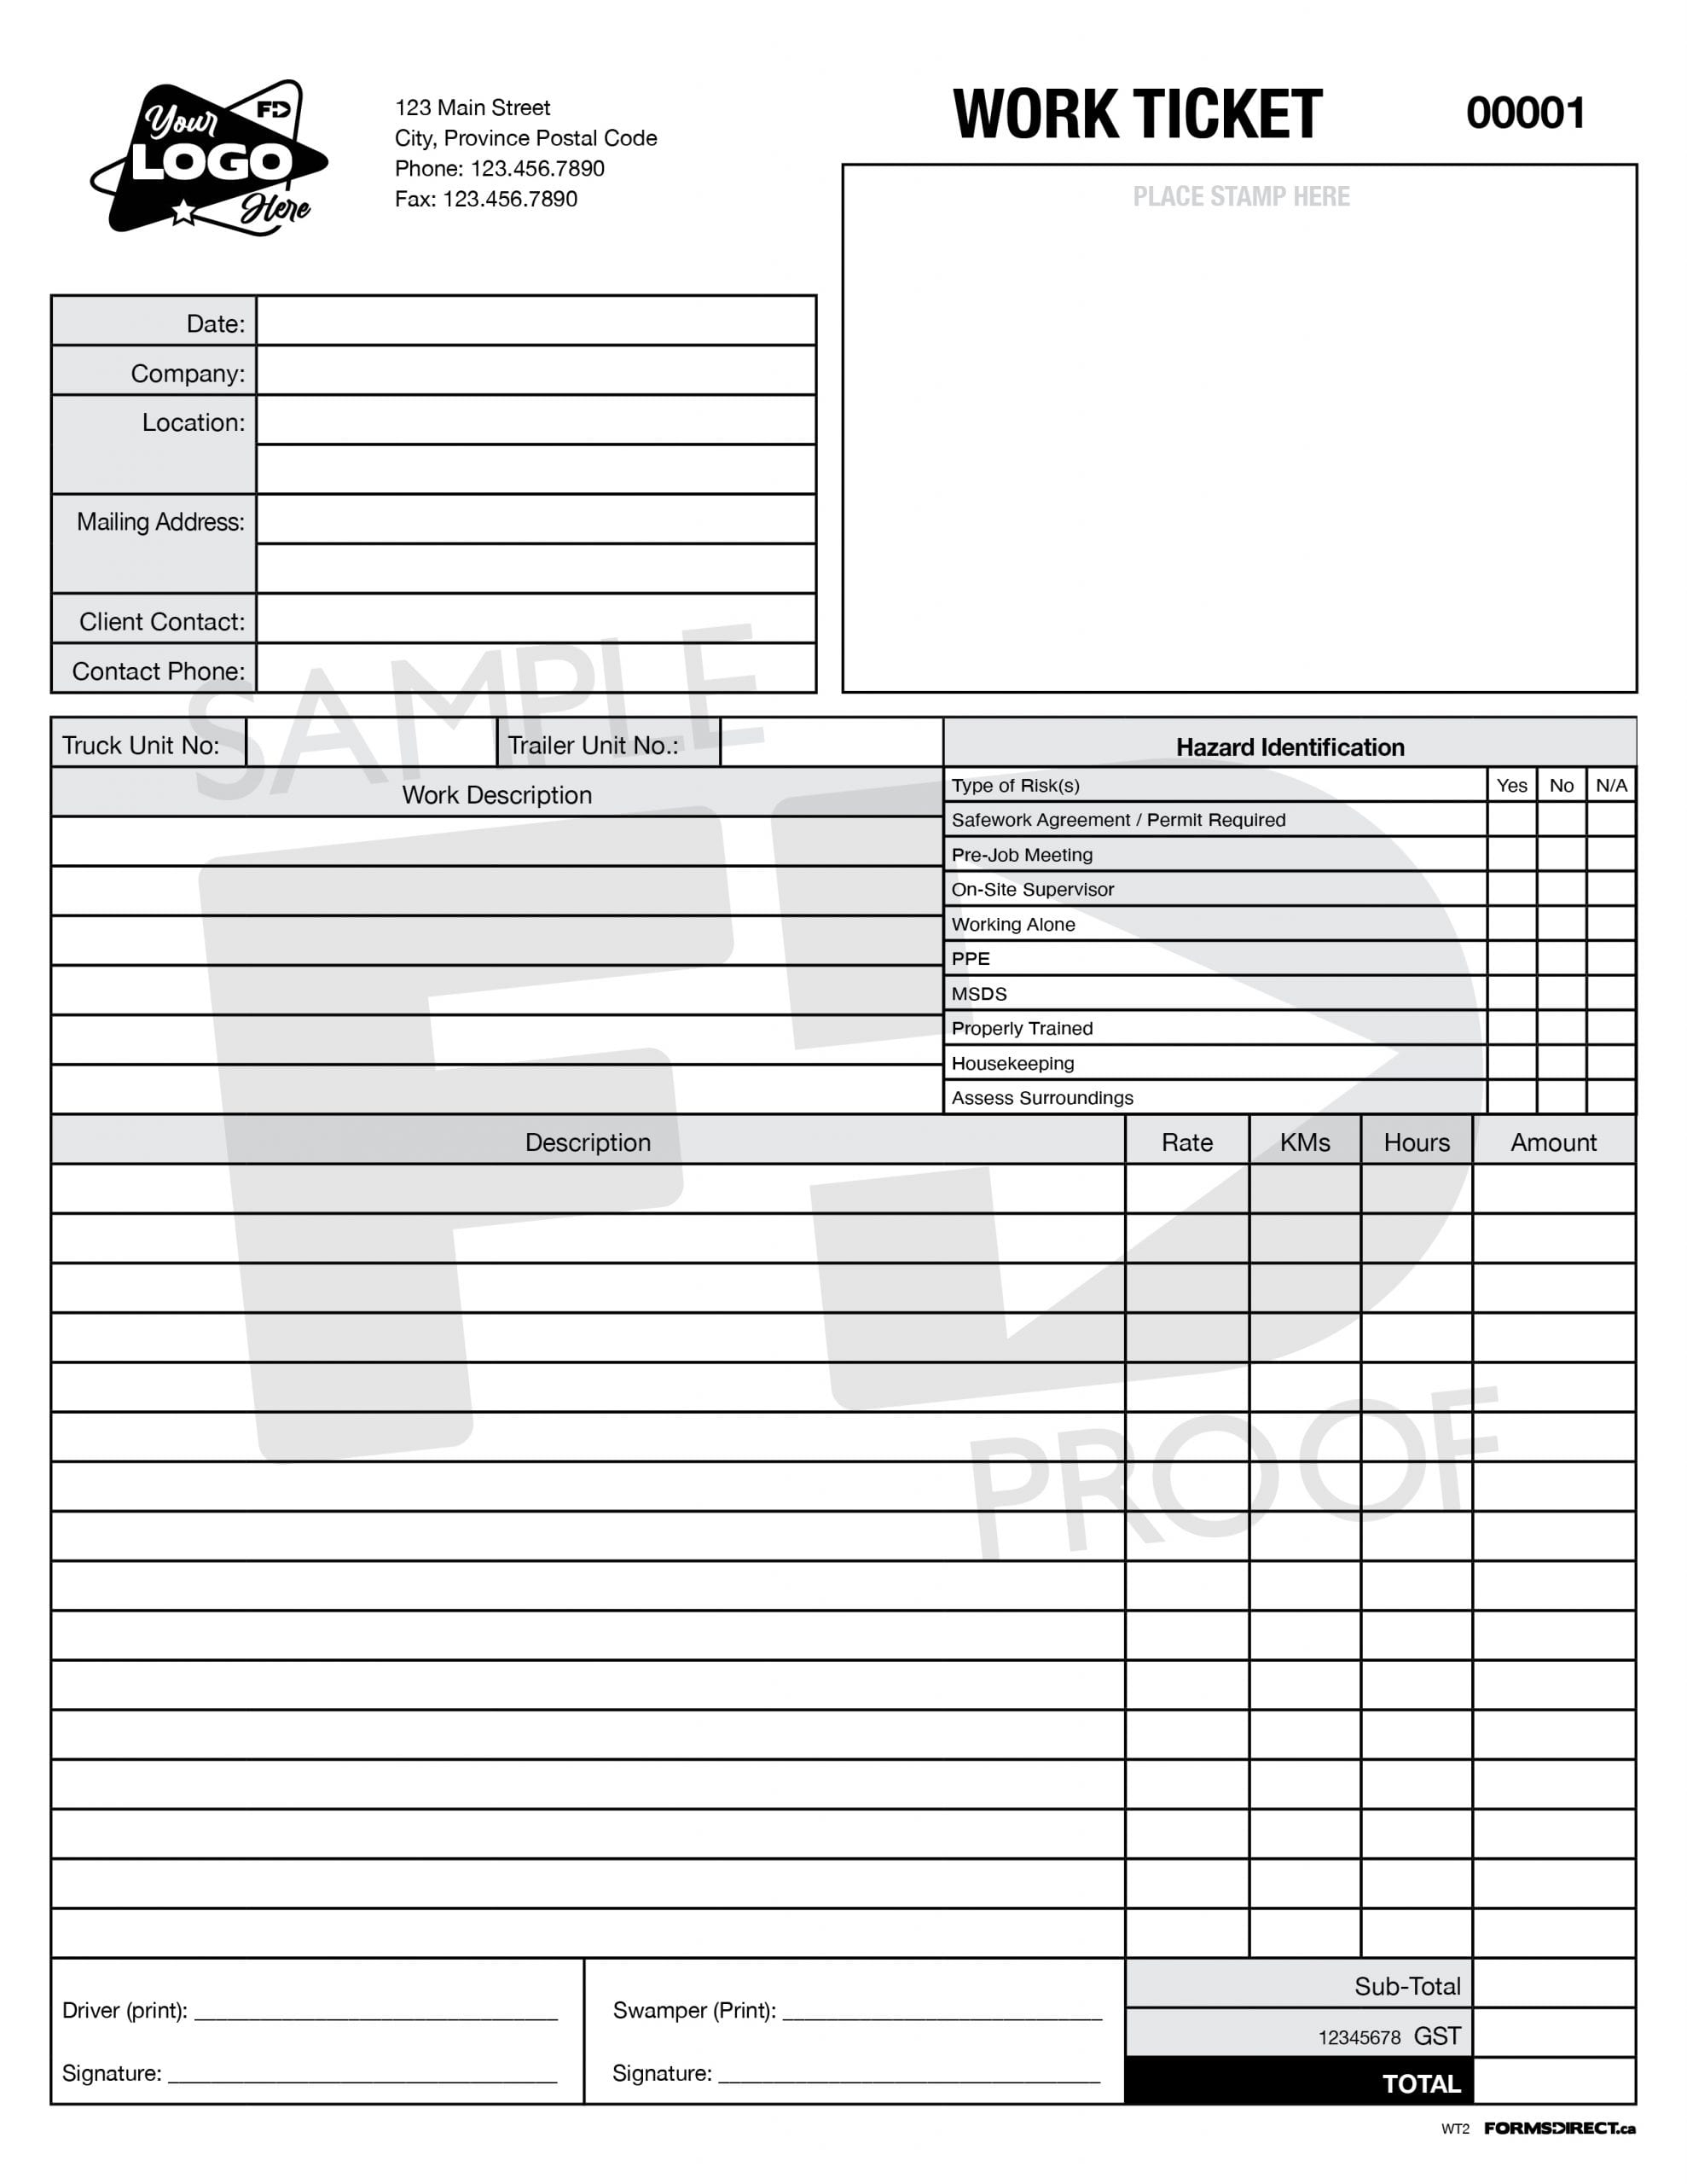 Work Ticket WT2 Customizable Form Template Forms Direct